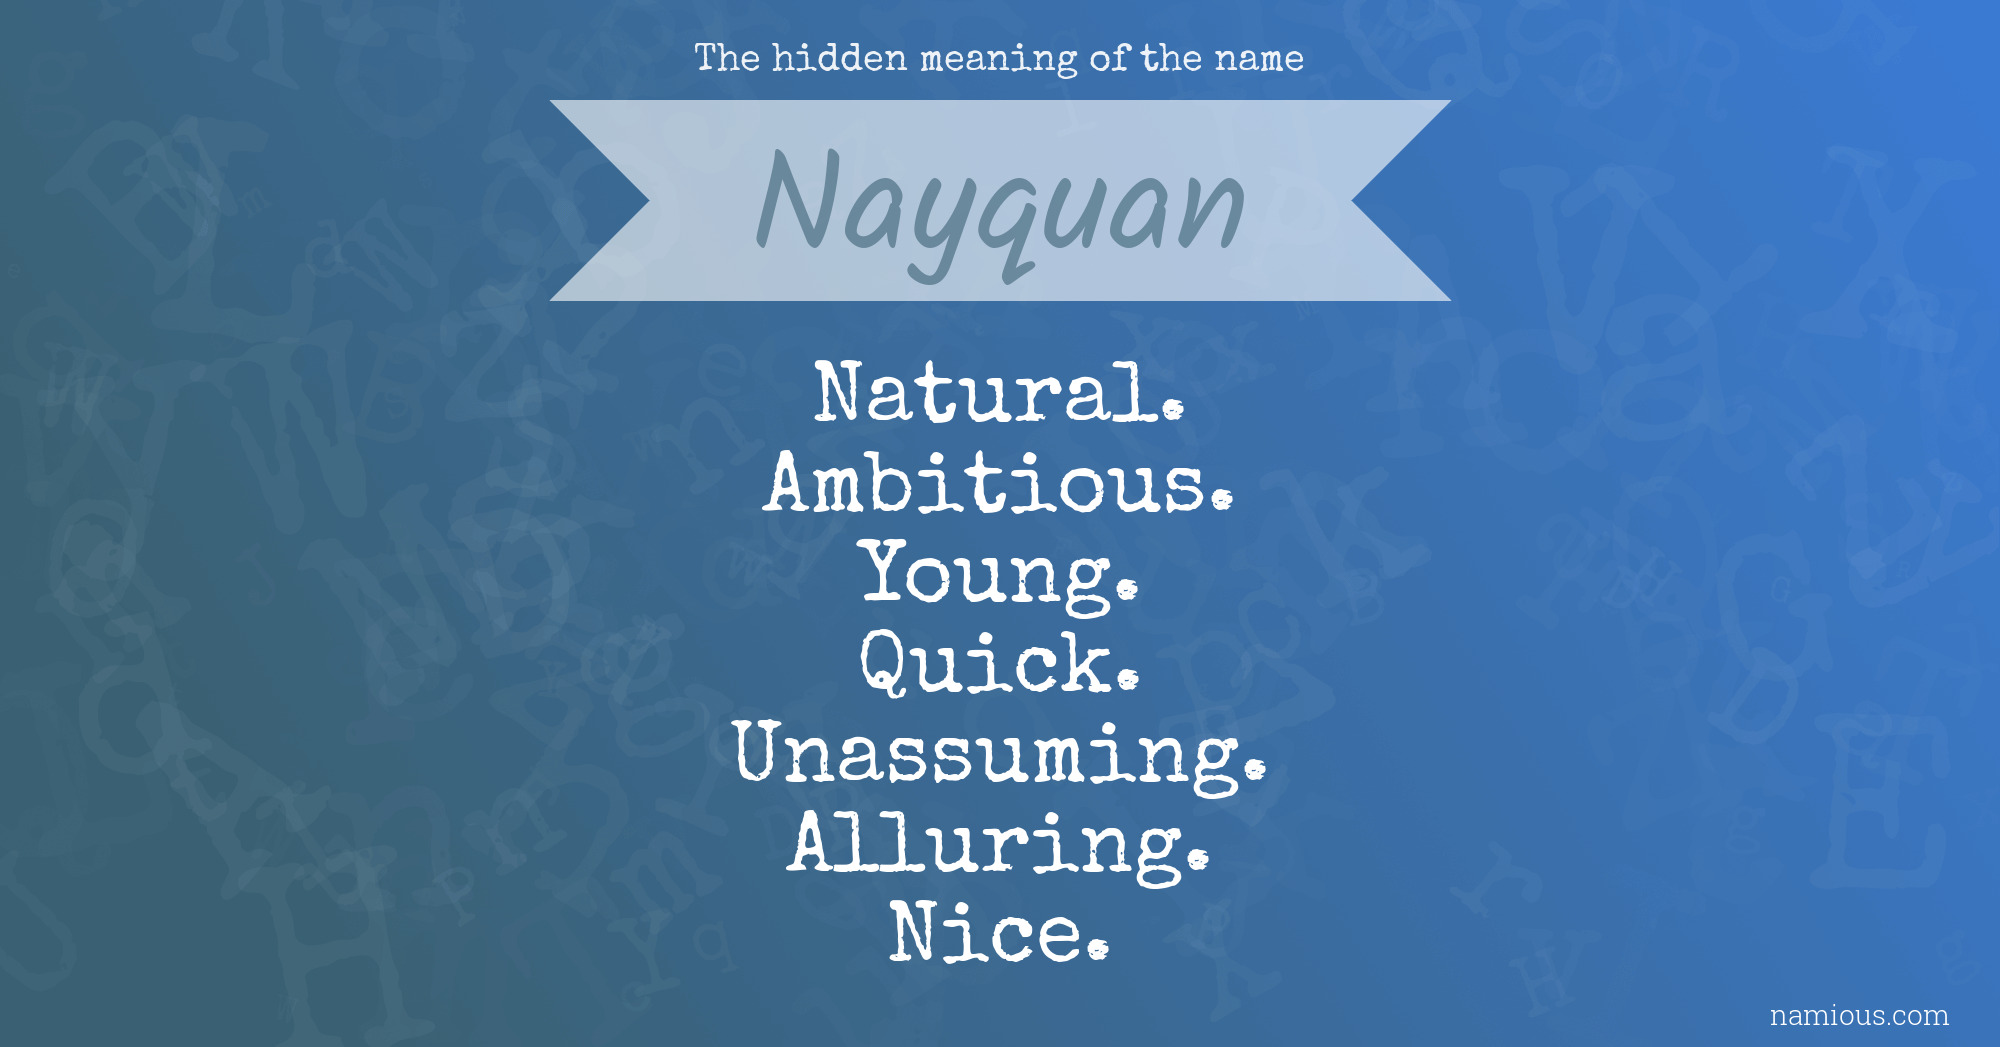 The hidden meaning of the name Nayquan